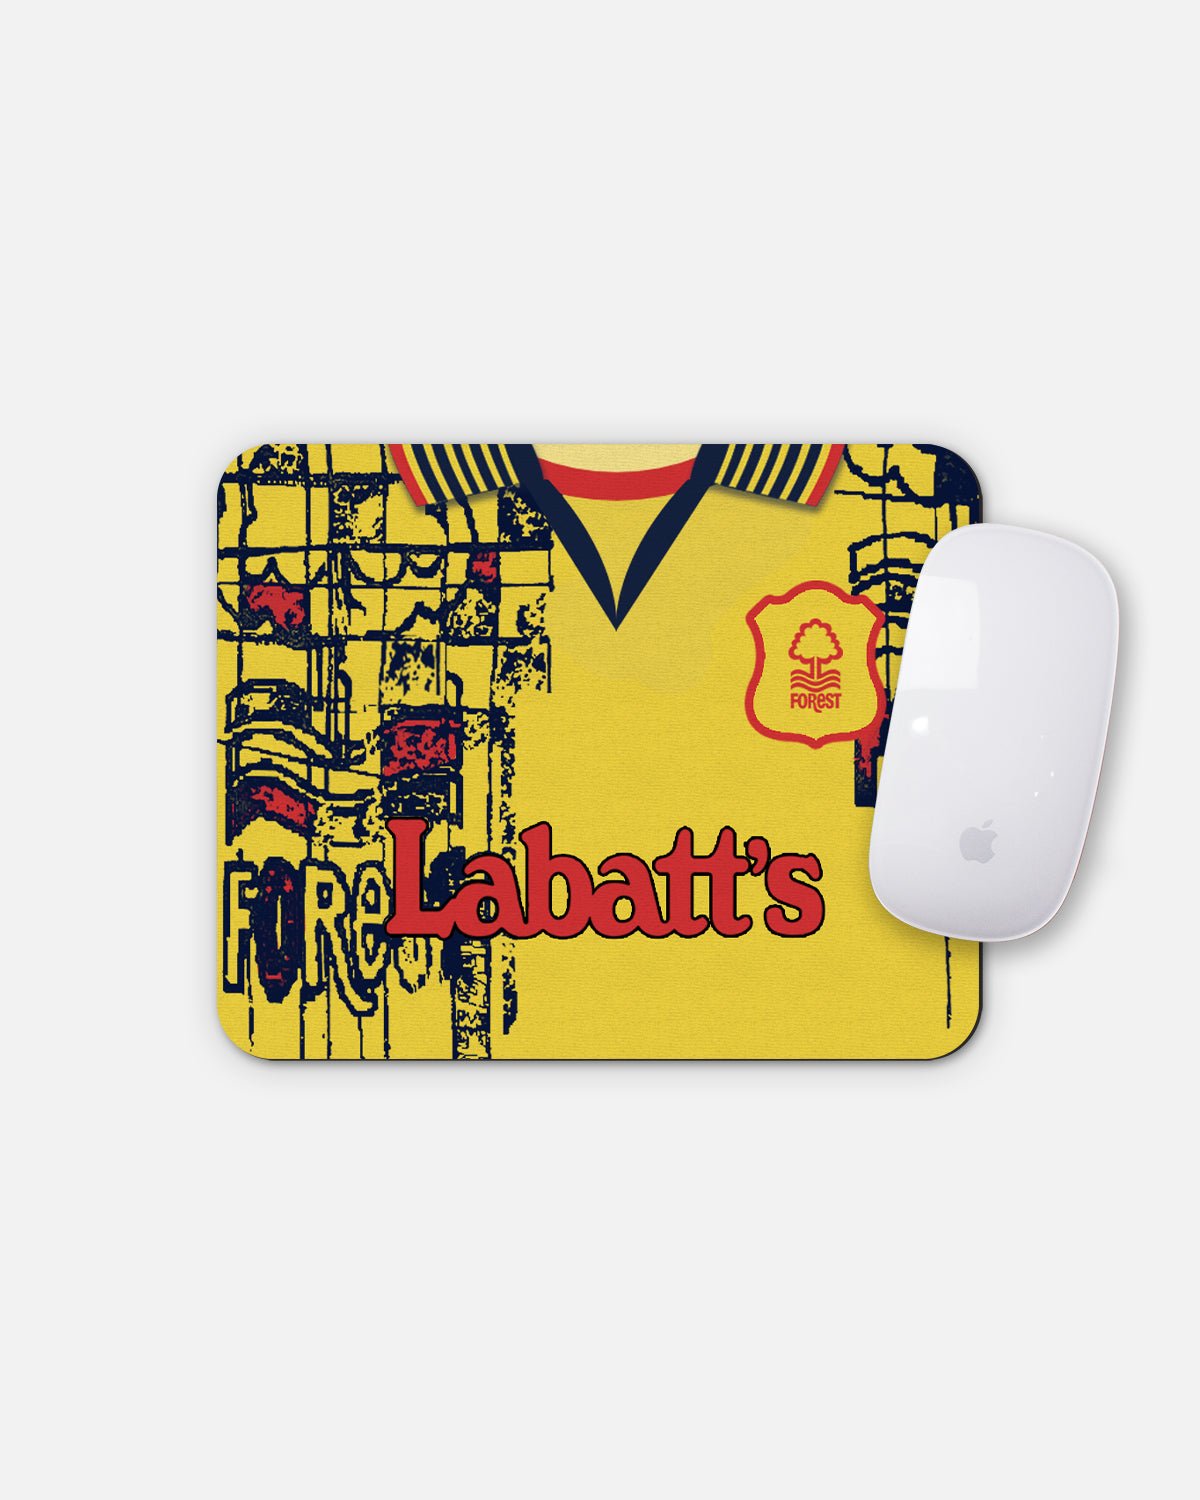 NFFC 1997 Away Mouse Mat - Nottingham Forest FC